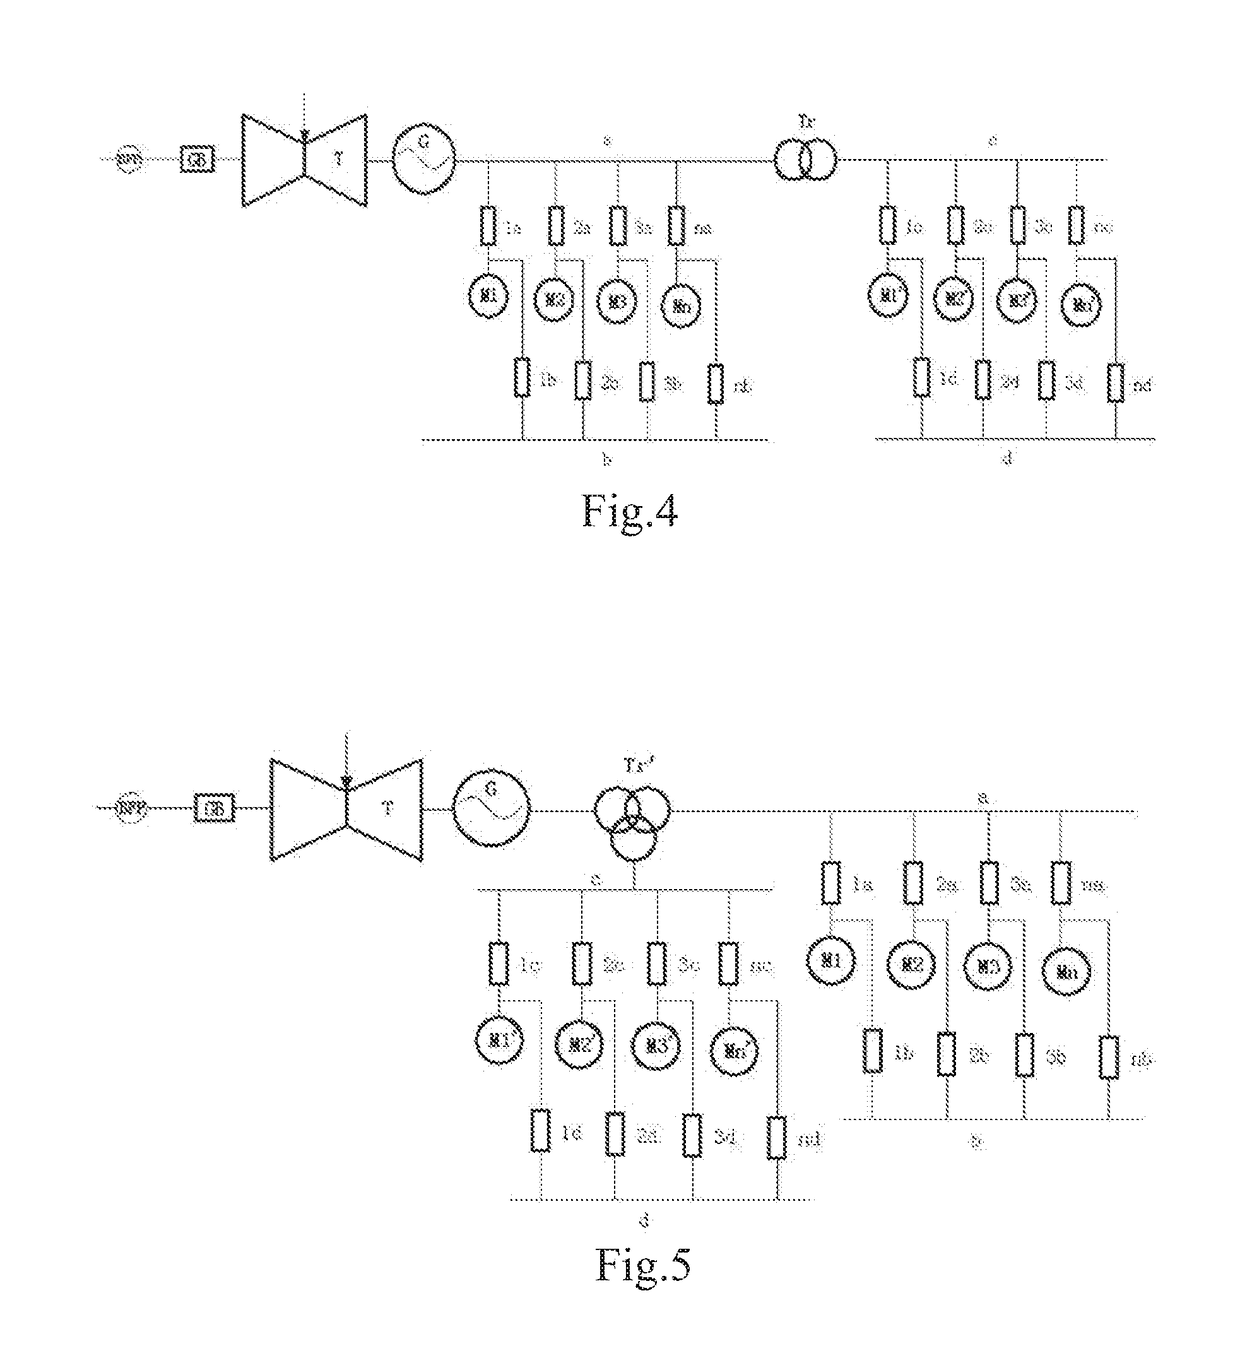 Generalized frequency conversion system for steam turbine generator unit